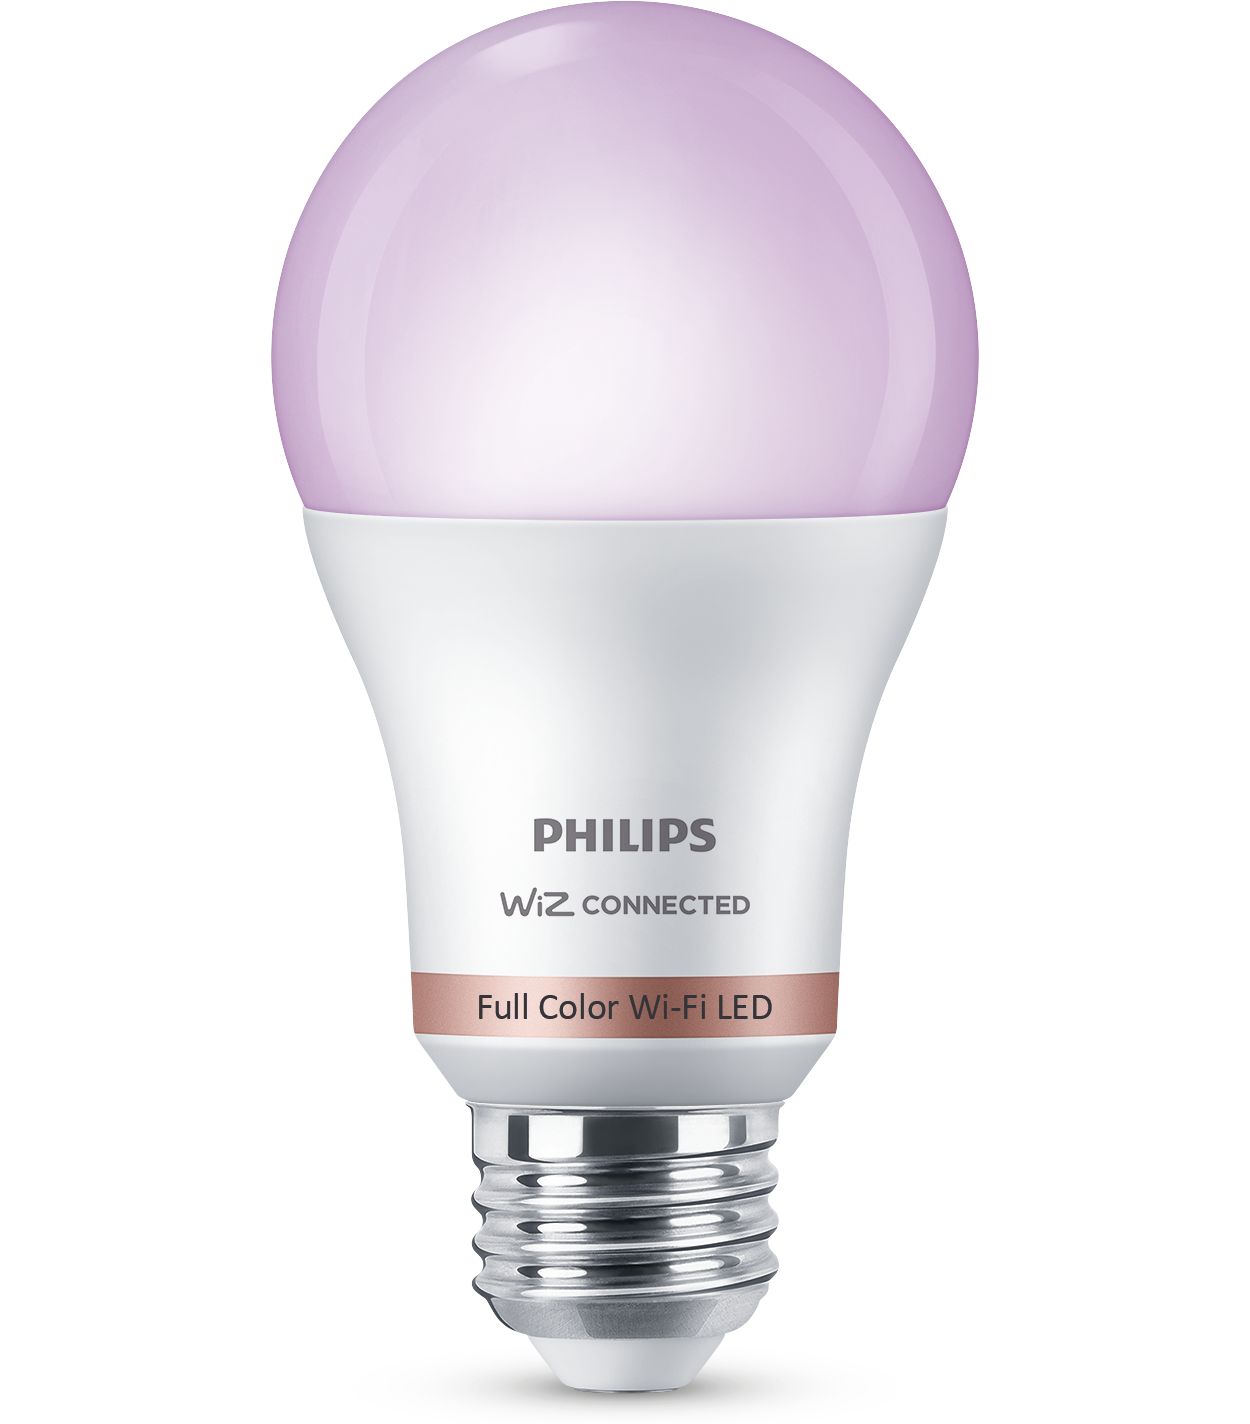 Easy-to-use smart full color bulb